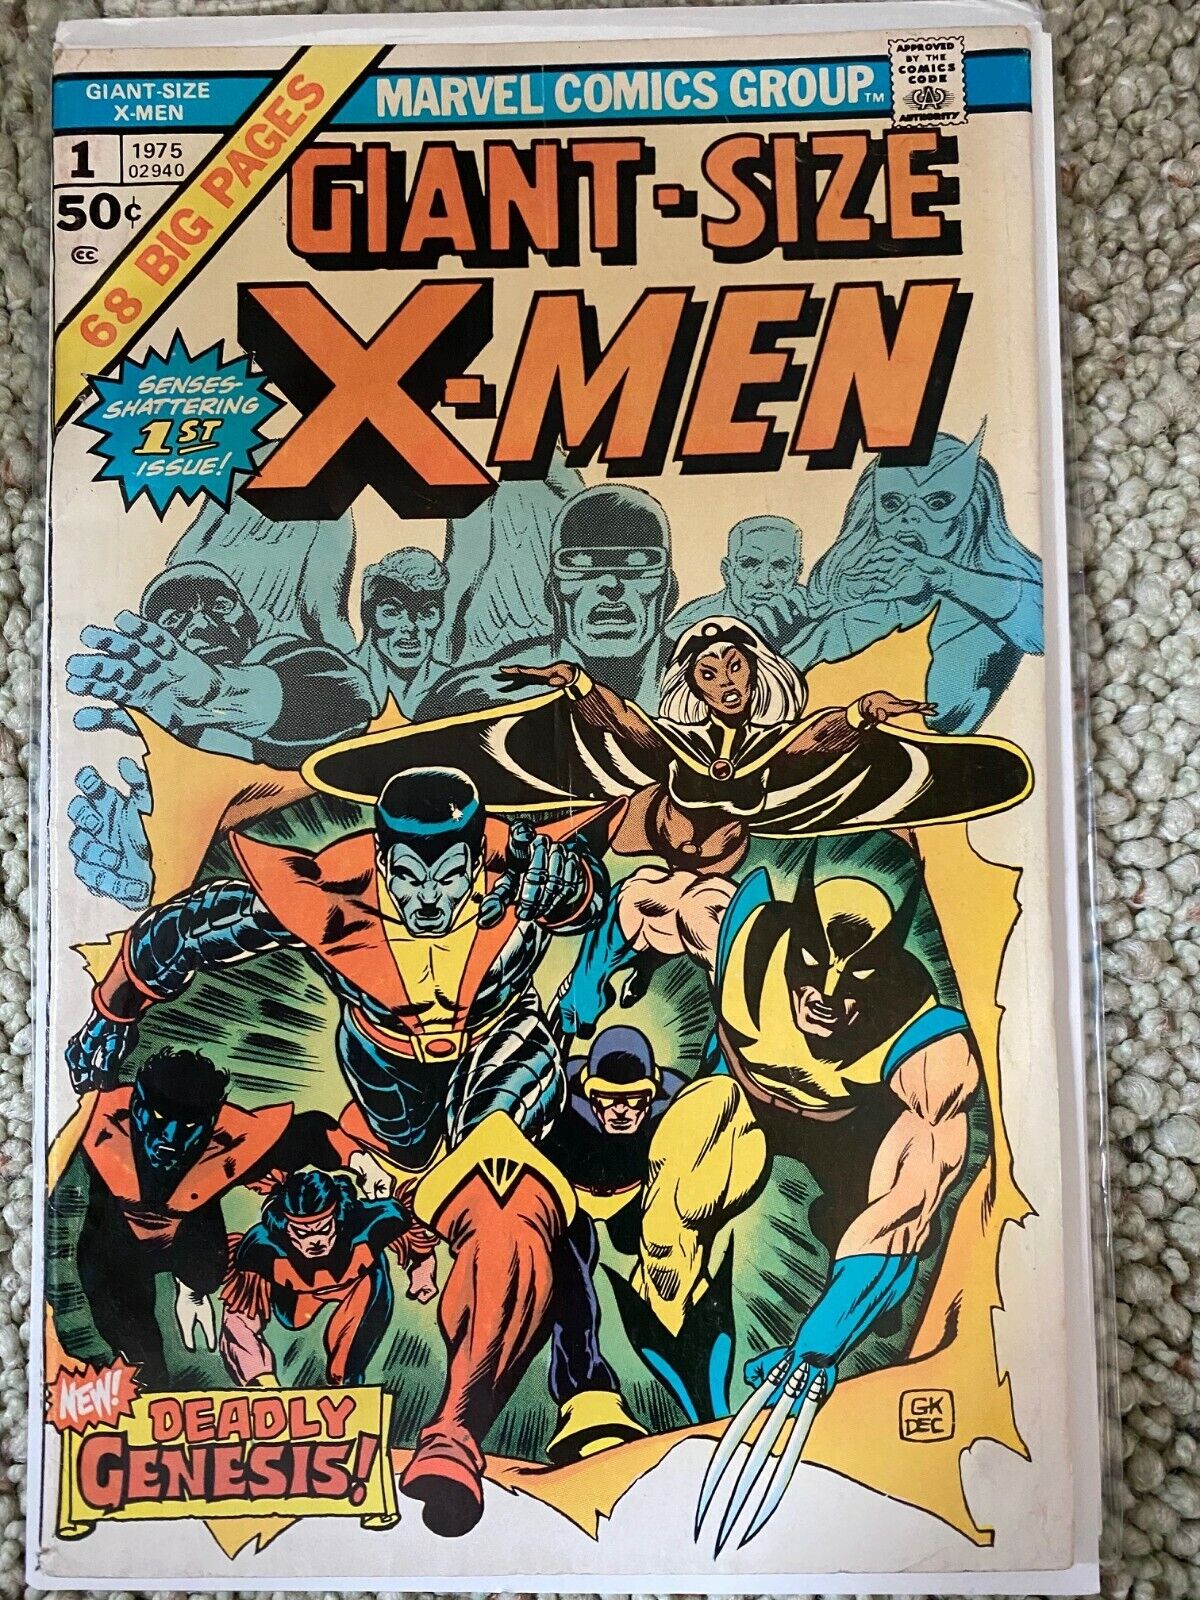 Giant Sized X-men #1 (signed) PLUS #100- #400 - lot of 300 mostly 8.0 VF comics